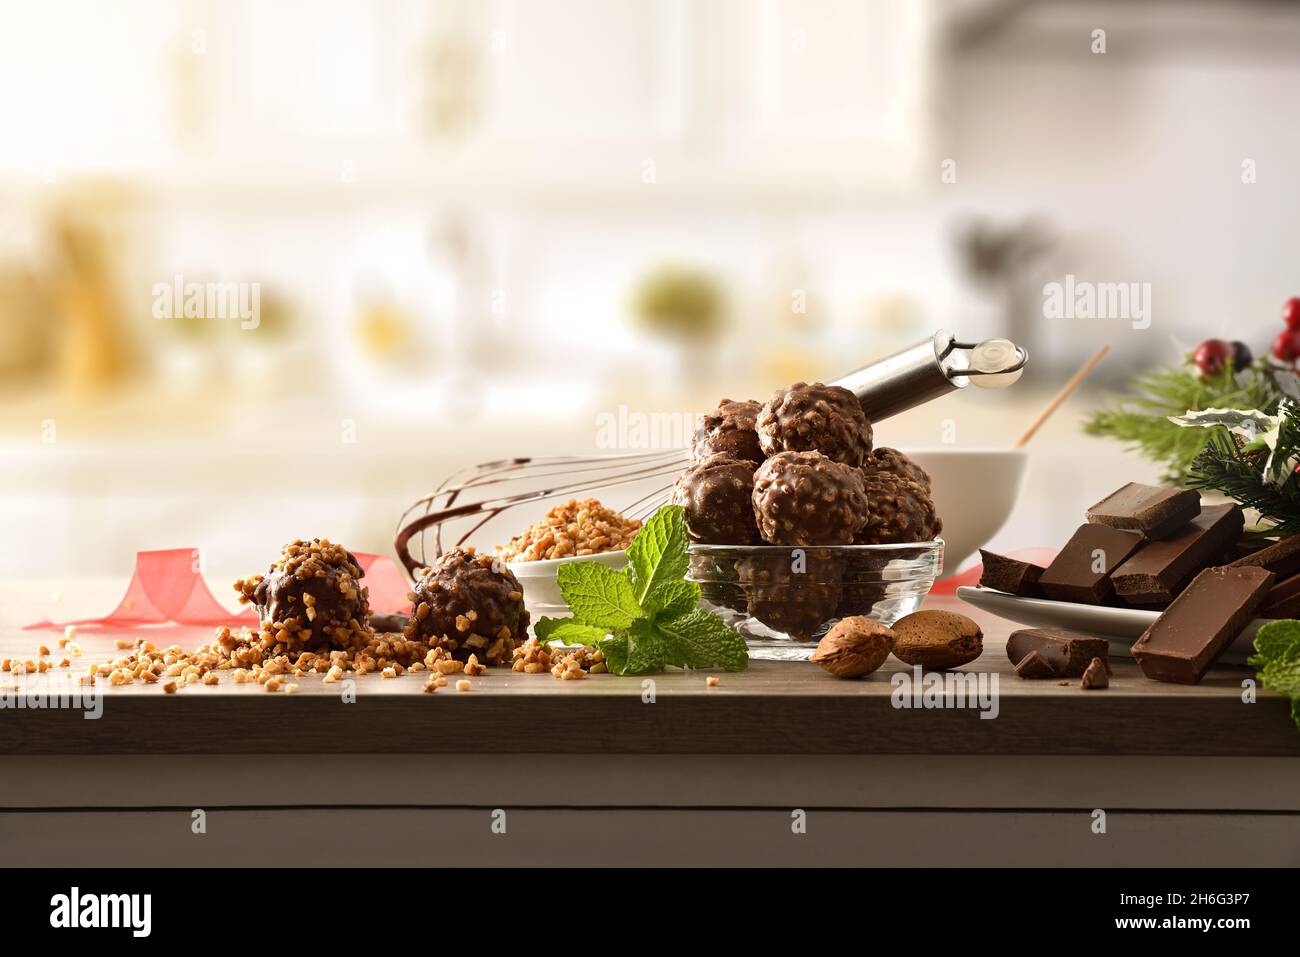 Preparing chocolate balls with almond chips on a kitchen bench. Front view. Horizontal composition. Stock Photo